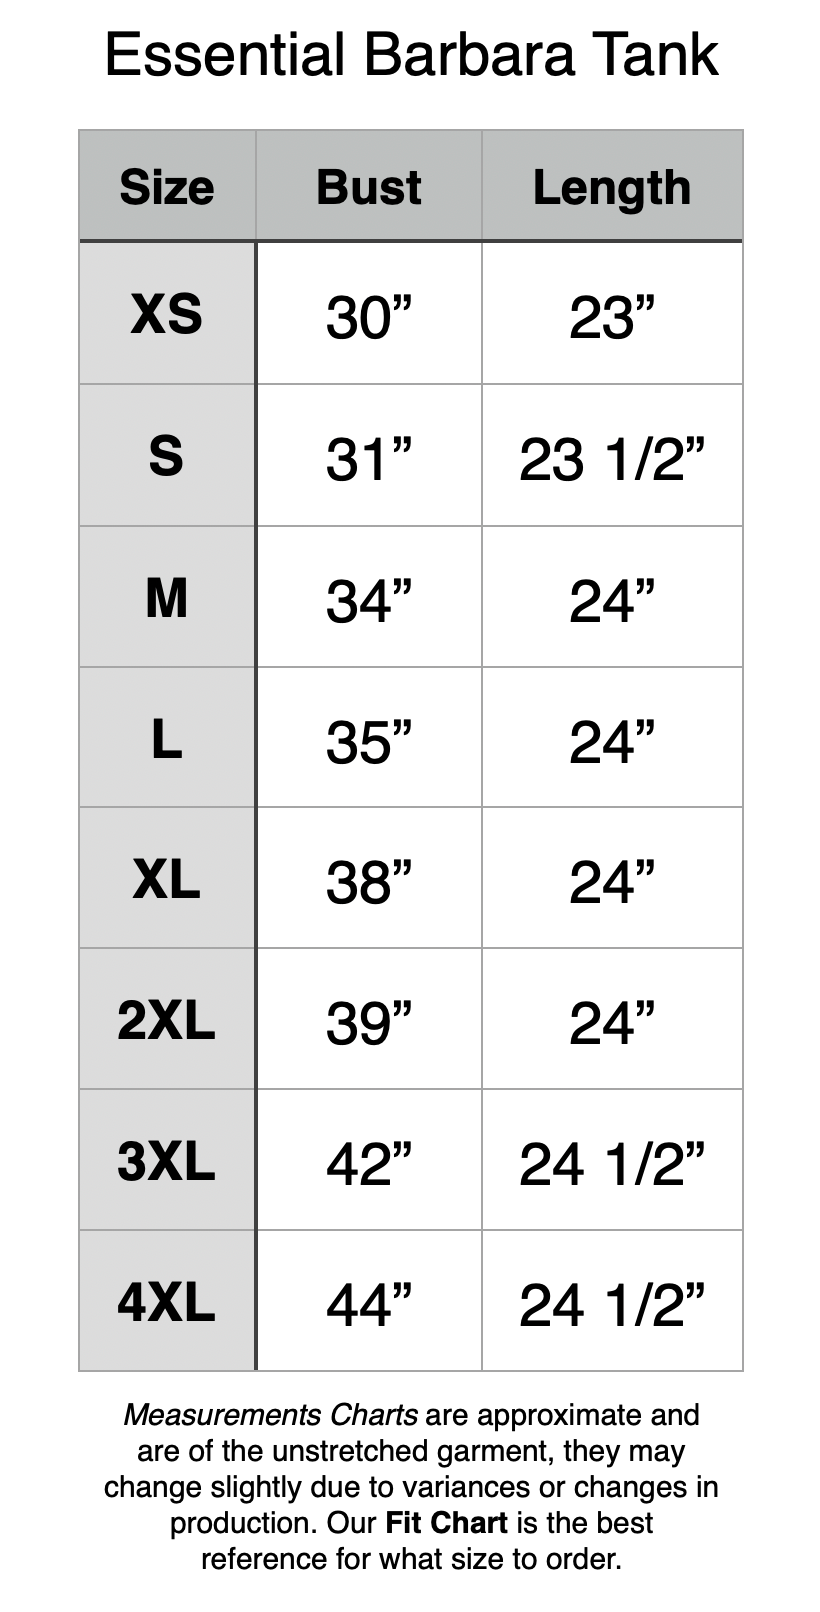 Essential Barbara Tank - XS: 30” Bust, 23” Length. S: 31” Bust, 23.5” Length. M: 34” Bust, 24” Length. L: 35” Bust, 24” Length. XL: 38” Bust, 24” Length. 2XL: 39” Bust, 24” Length. 3XL: 42” Bust, 24.5” Length. 4XL: 44” Bust, 24.5” Length.